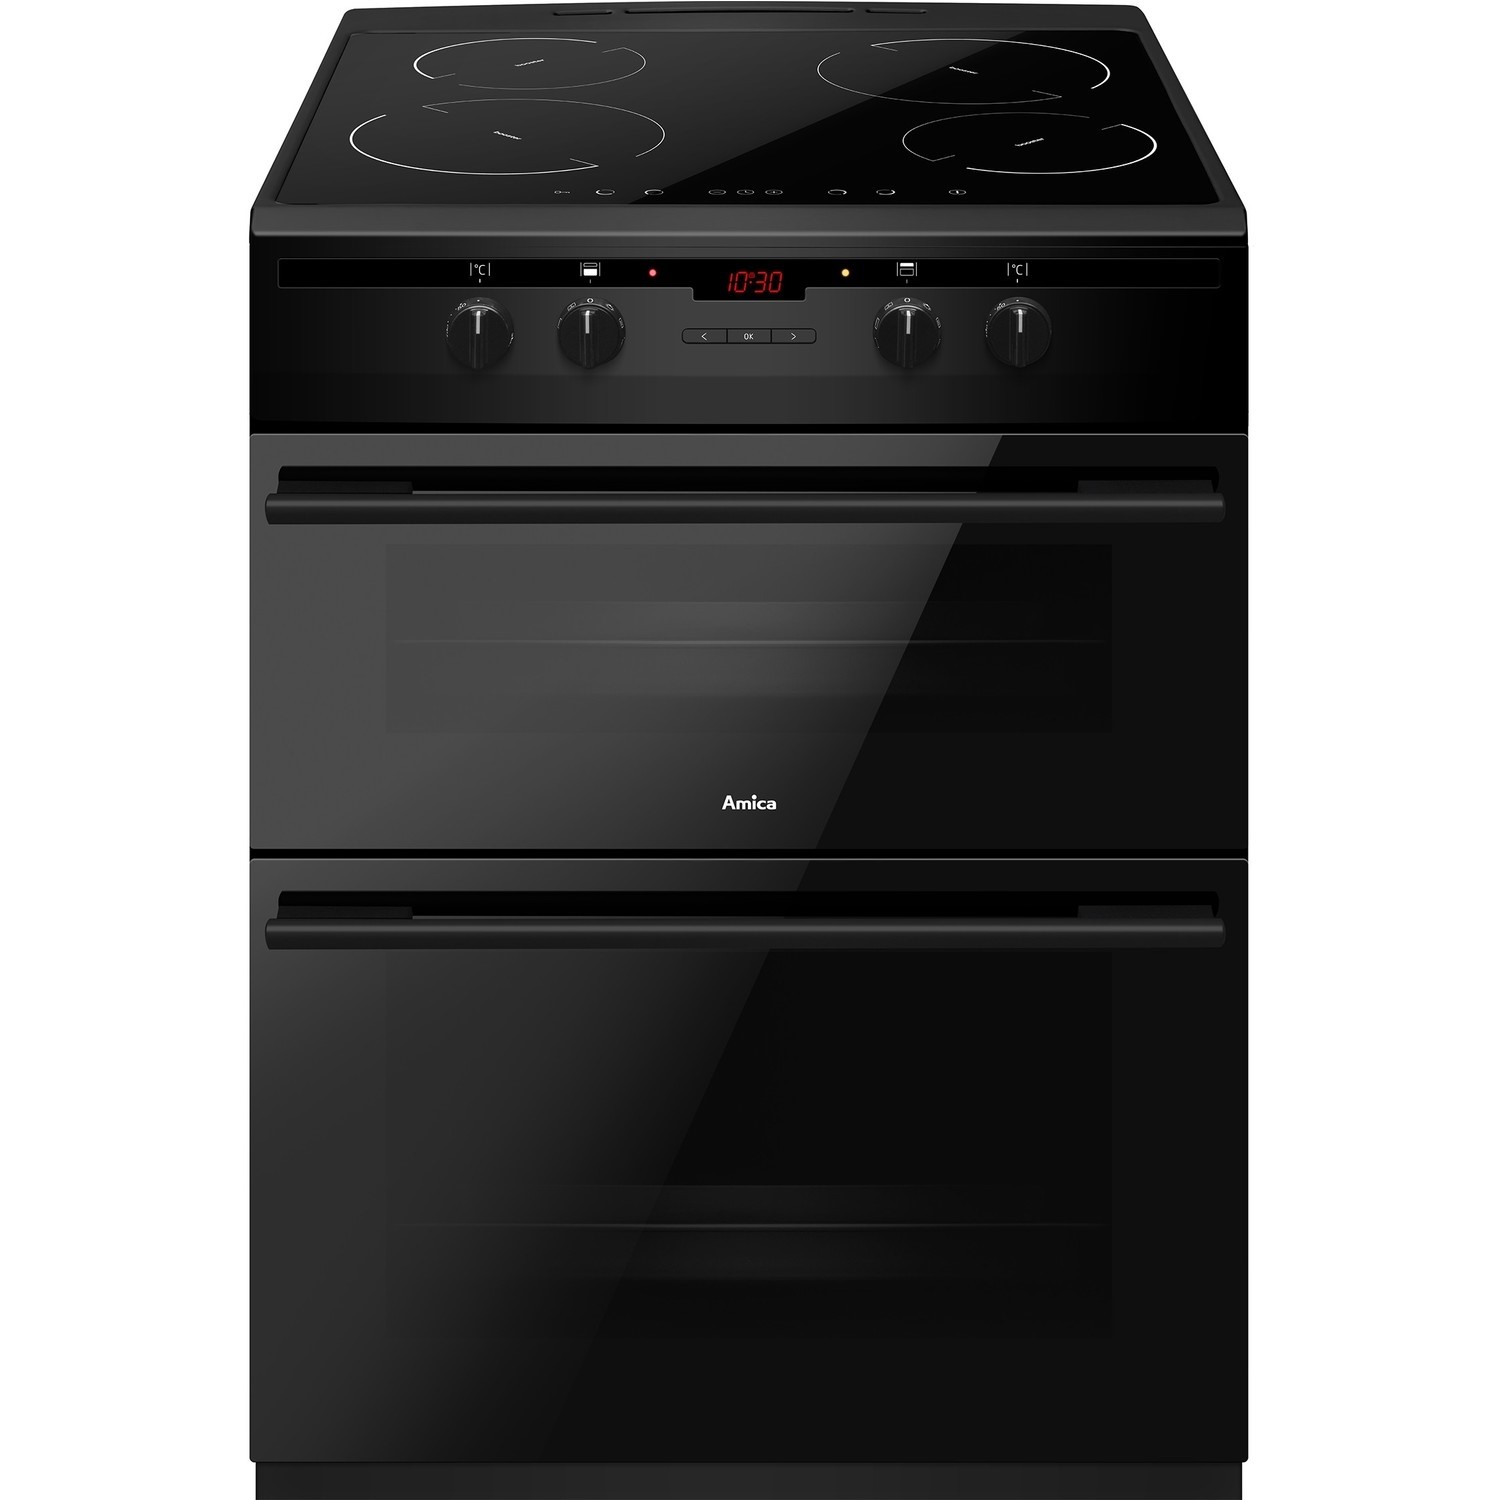 Amica 60cm Double Oven Electric Cooker with Induction Hob - Black